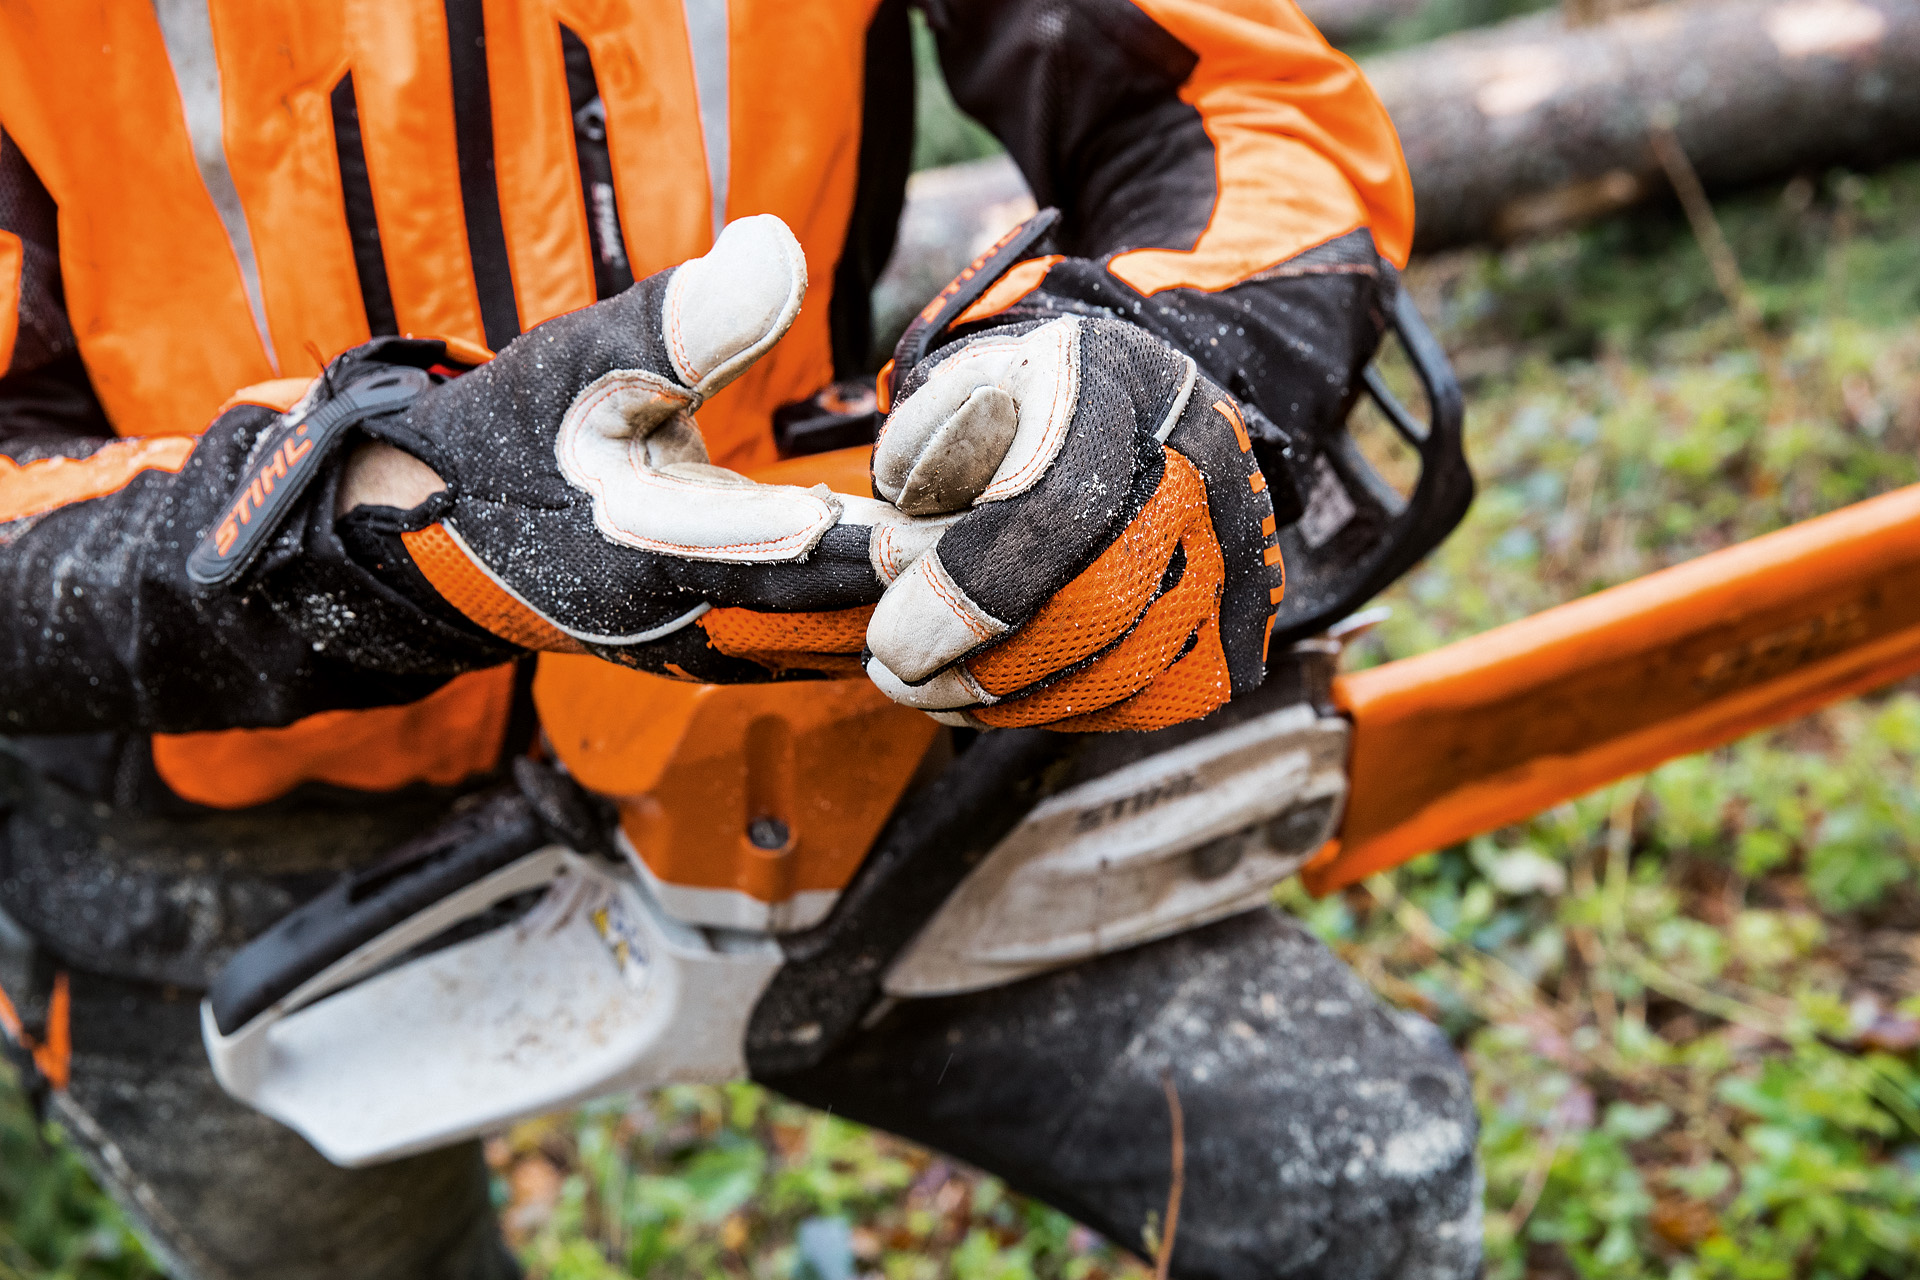 Close-up of STIHL ADVANCE Ergo MS protective gloves for chainsaw work being worn by someone holding a chainsaw